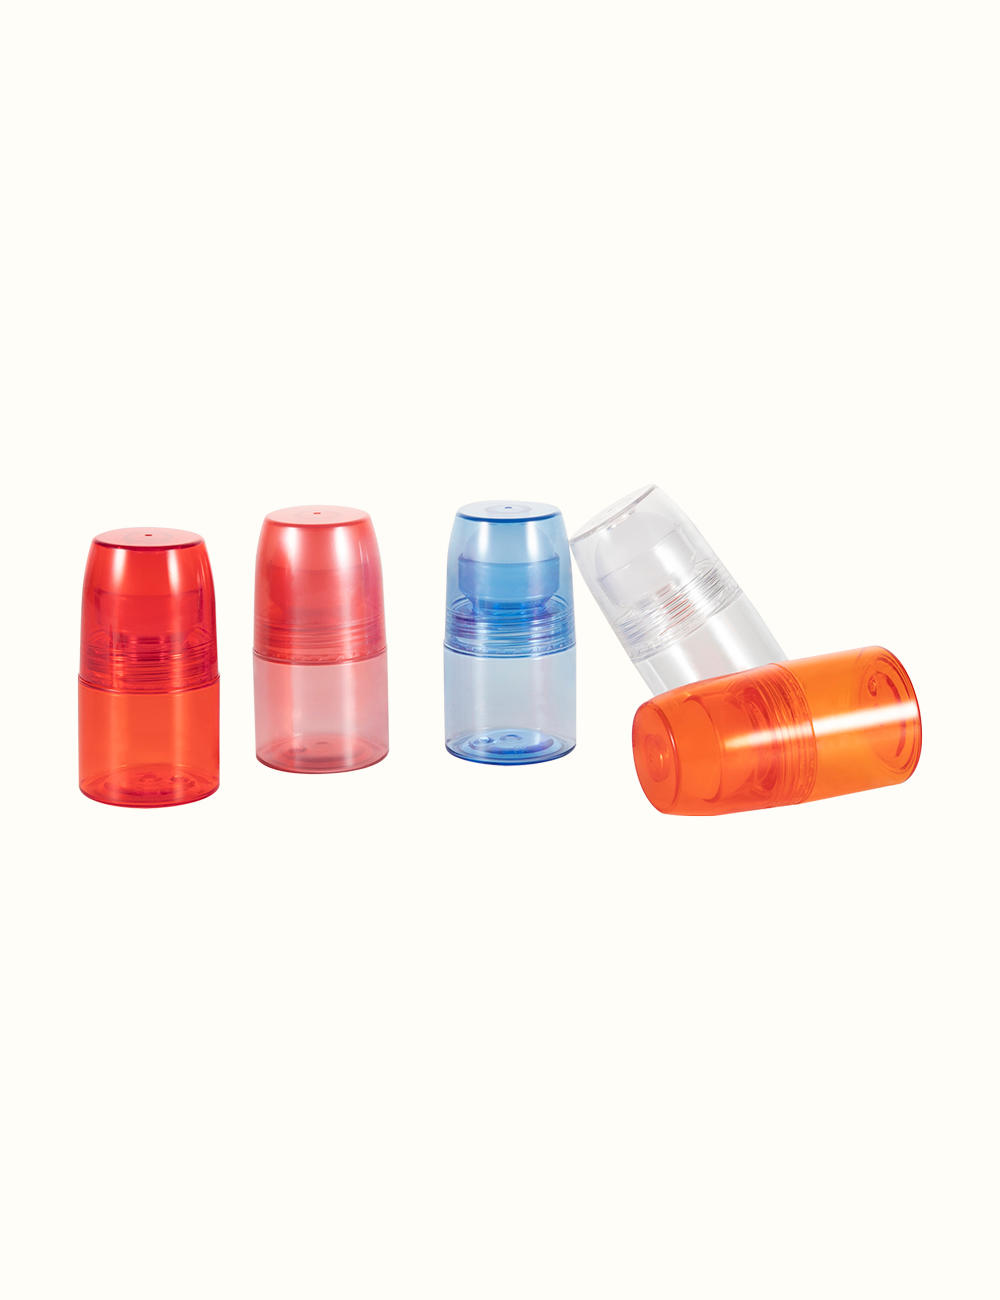 How does the design of the PET dropper bottle prevent leakage or spillage during transportation or storage?